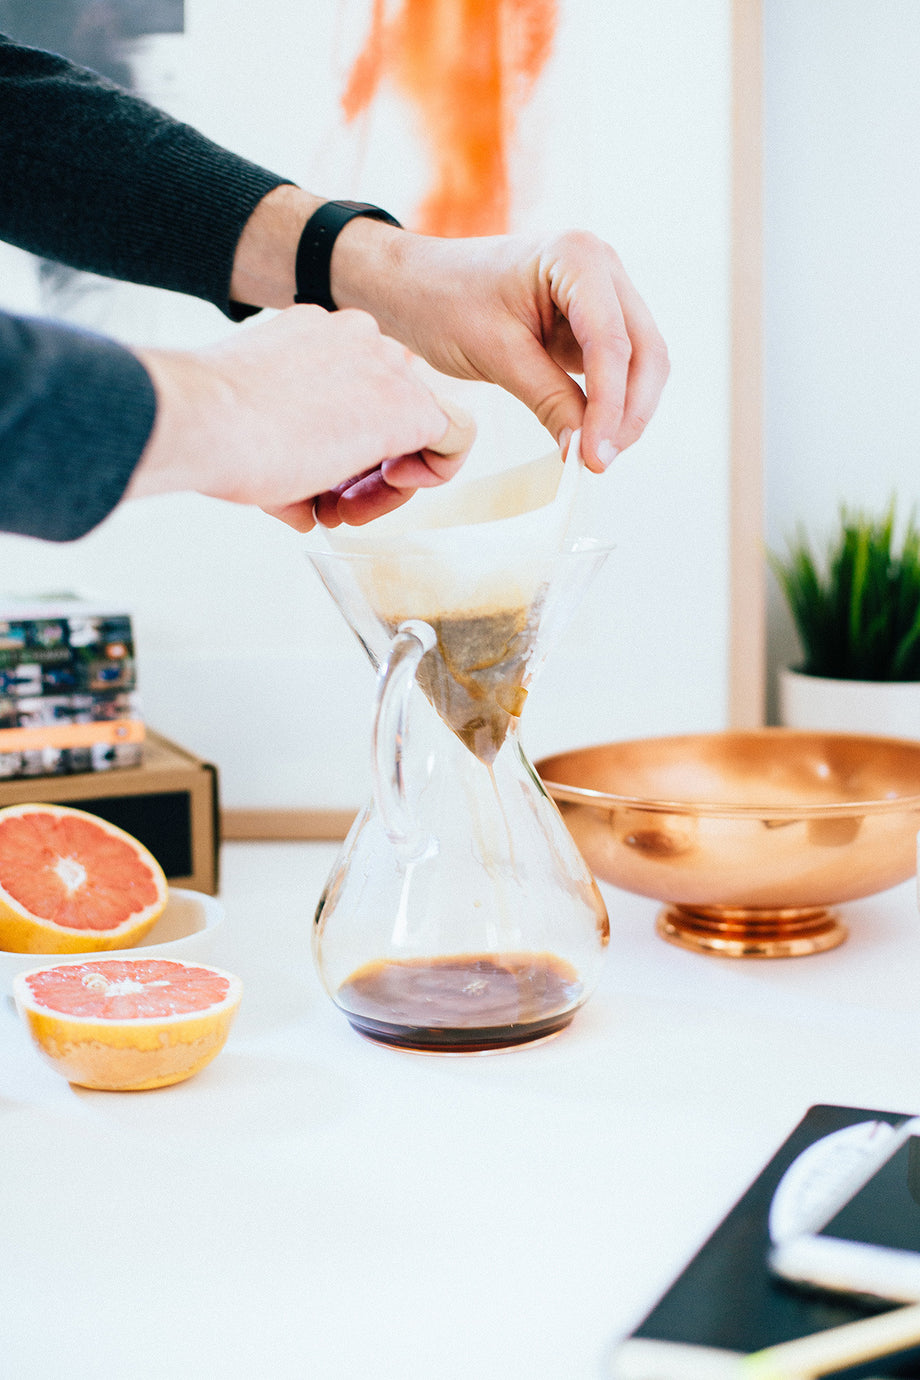 Chemex - 3 Cup, 6 Cup, 8 Cup — Snowy Owl Coffee Roasters